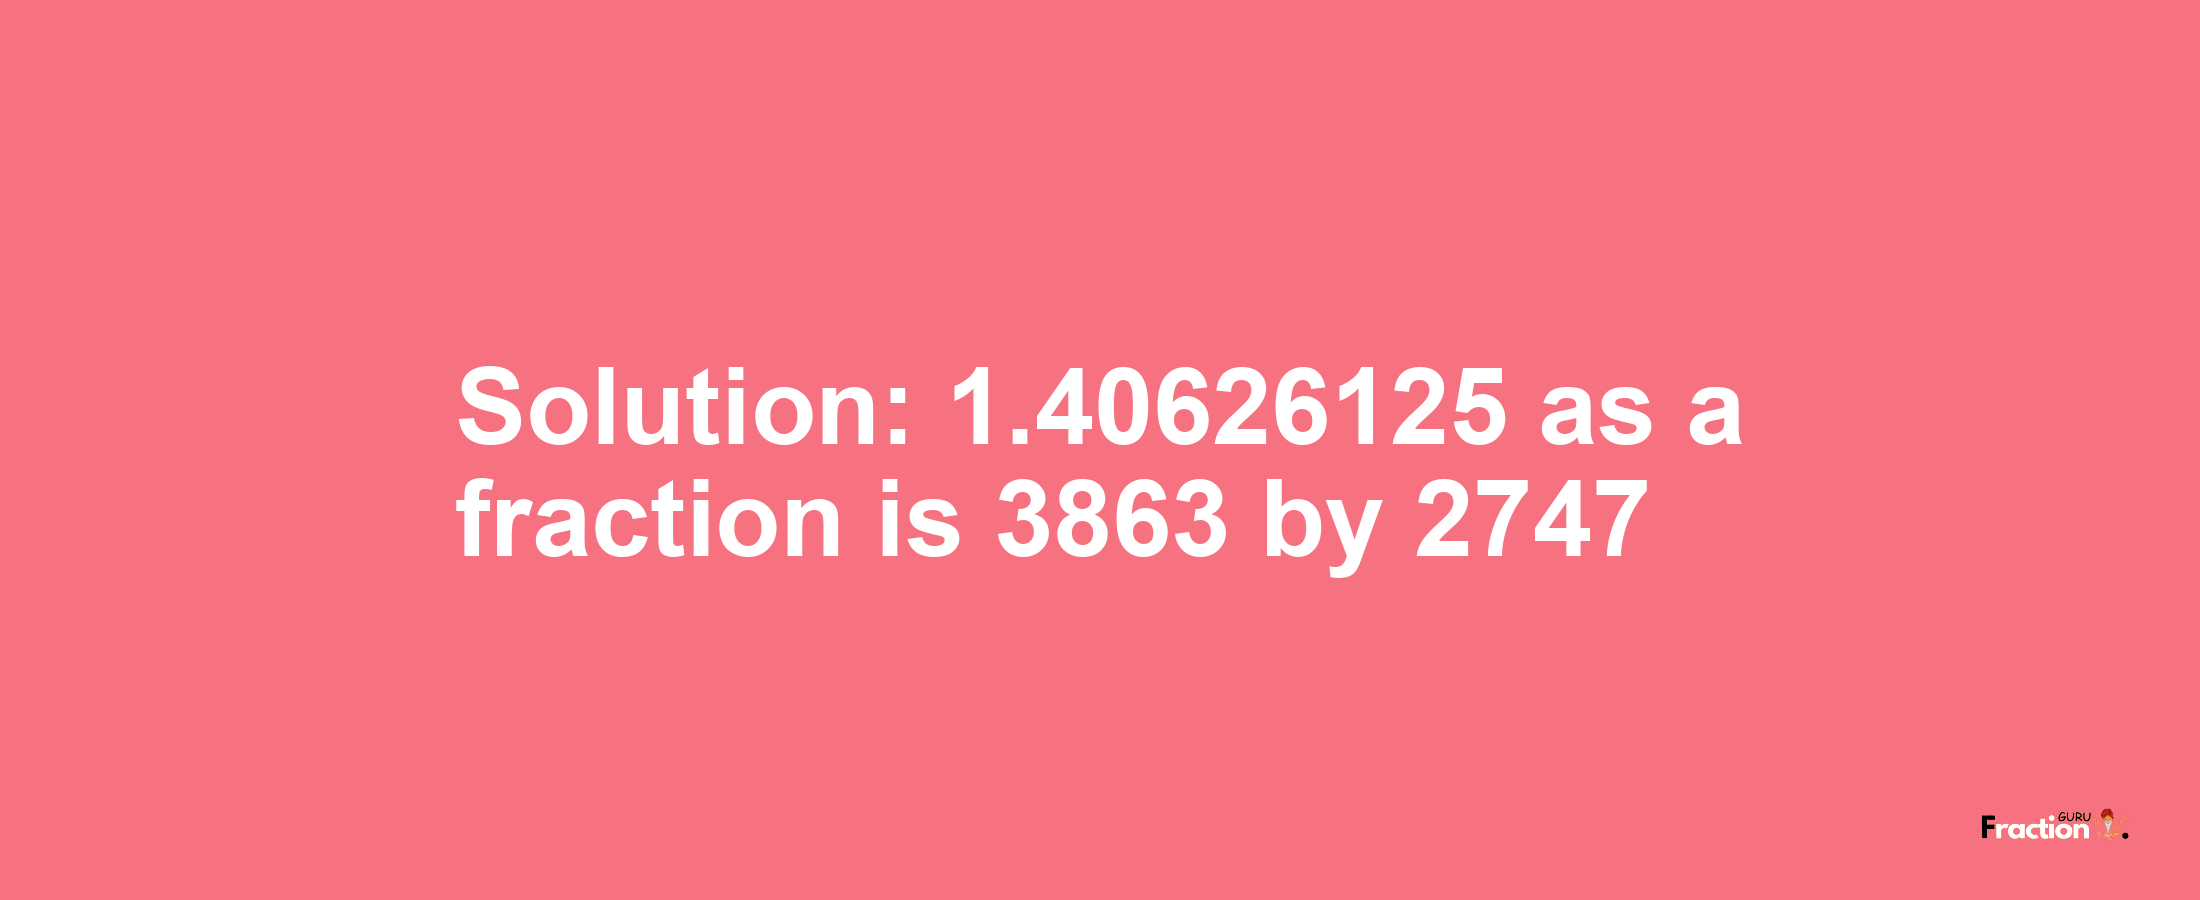 Solution:1.40626125 as a fraction is 3863/2747